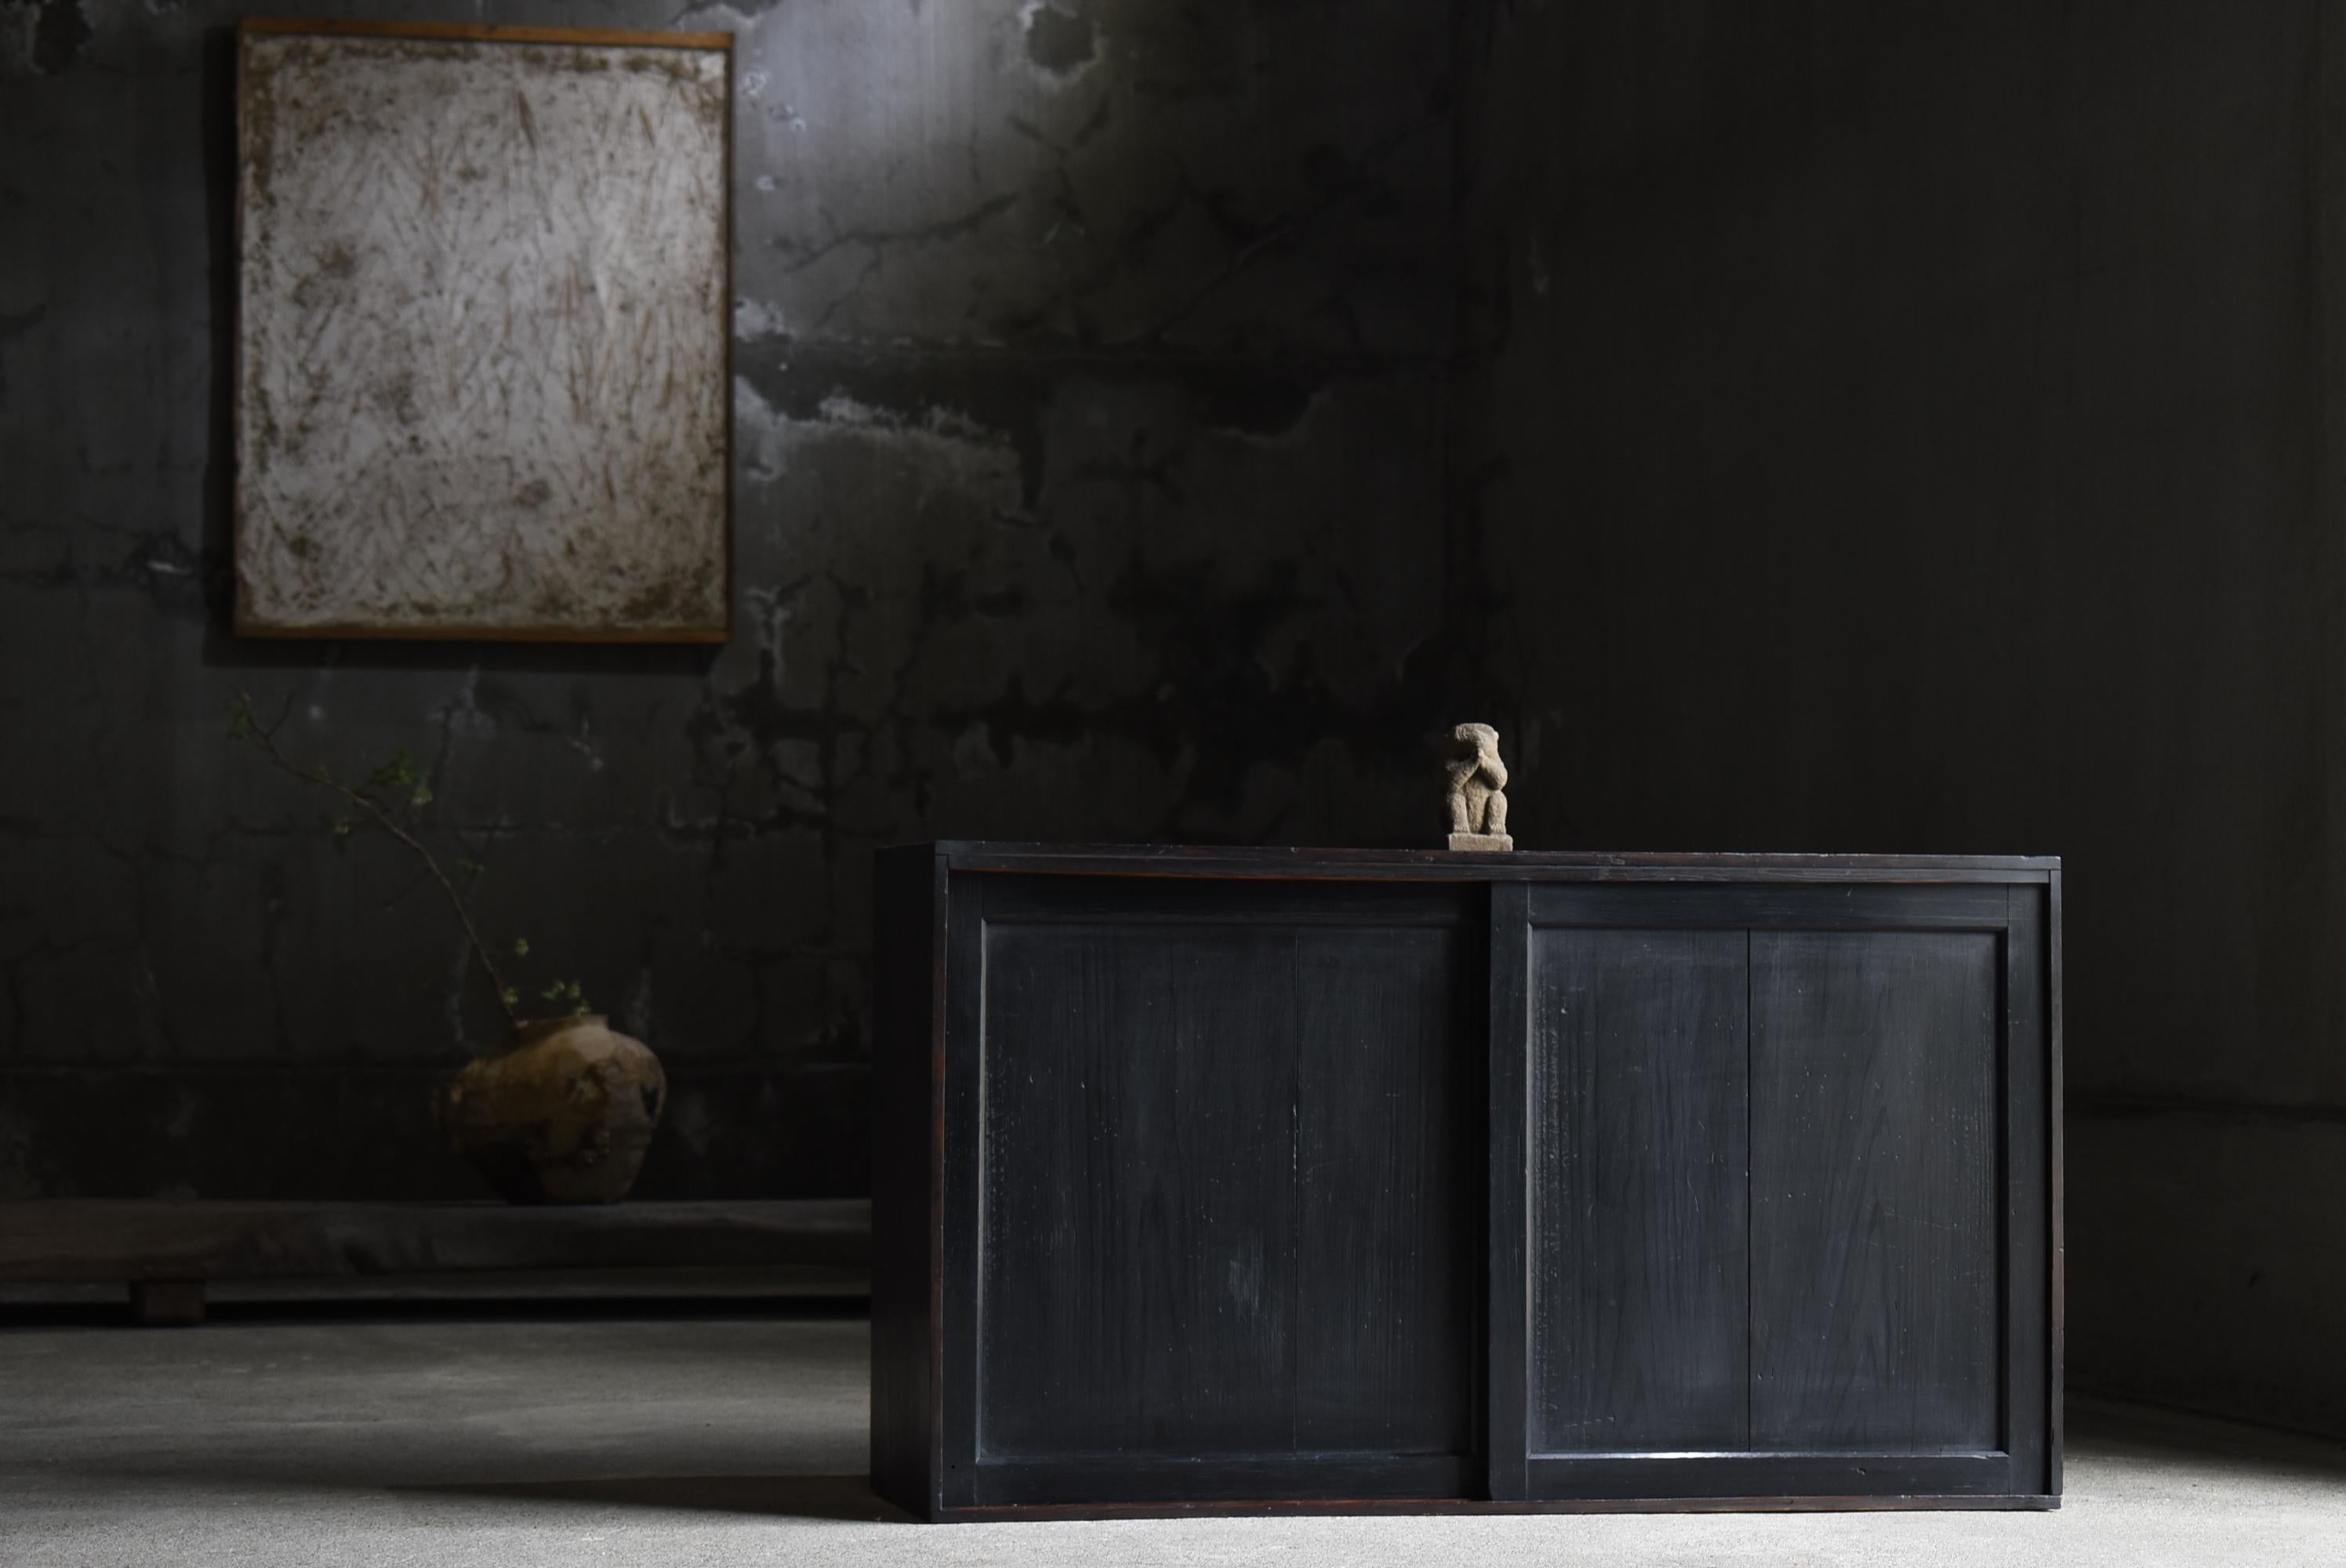 Very old Japanese black cabinet.
The furniture was made in the Meiji period (1860s-1900s).
It is made of cedar wood.

The design is simple and rustic.
There is no unnecessary design, it is the ultimate in simplicity.
Beautiful jet-black